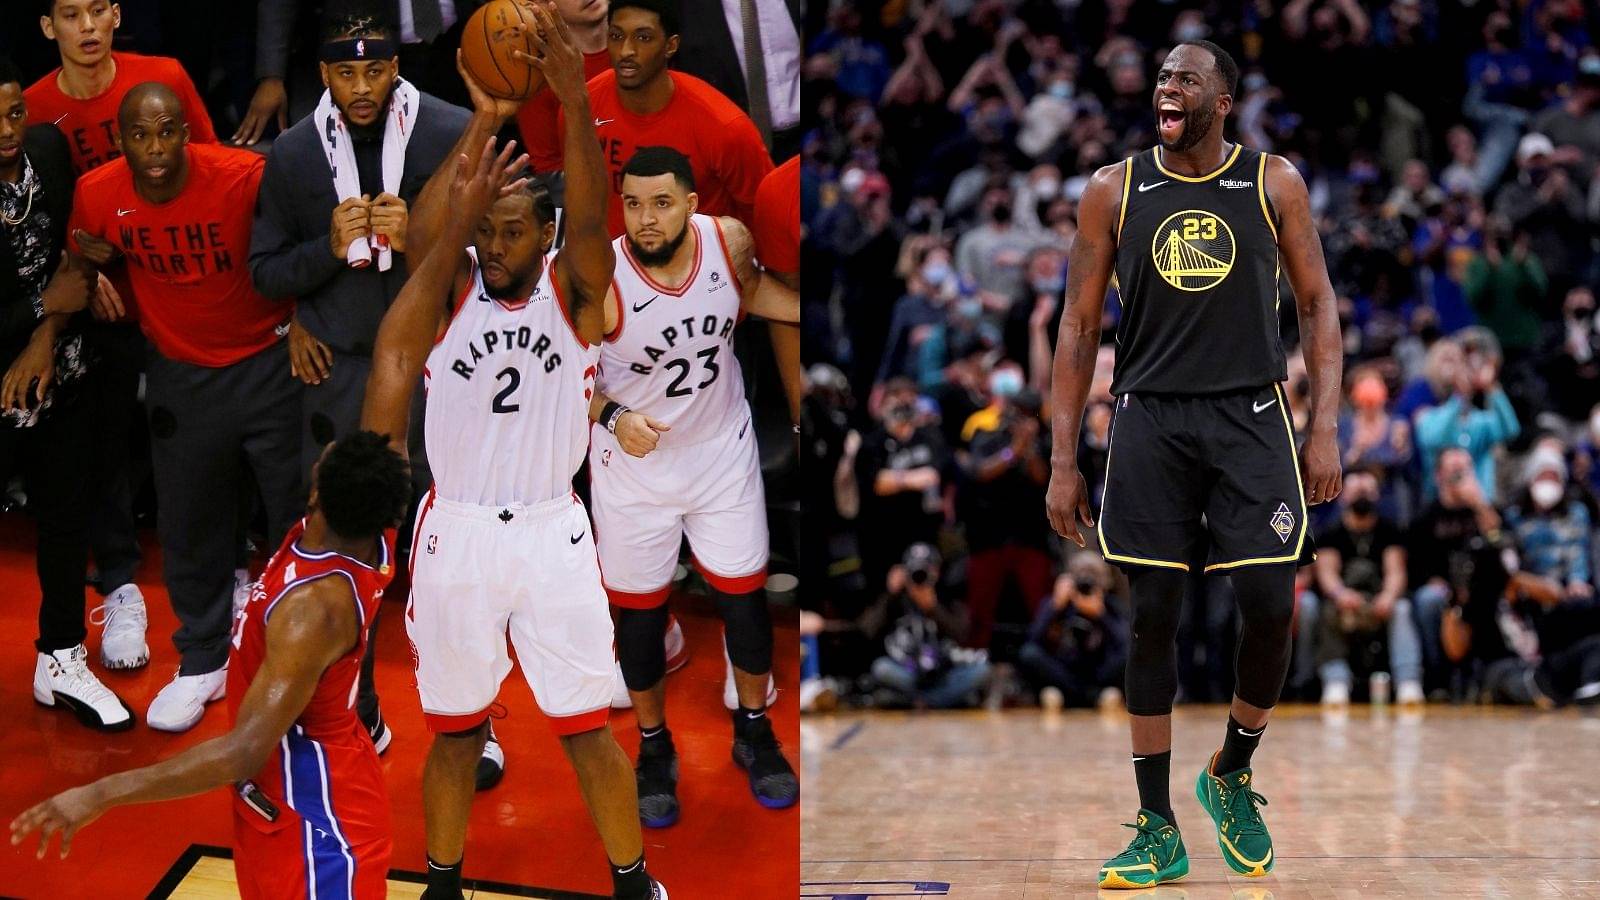 “Kawhi Leonard's shot ultimately caused me another ring”: Draymond Green discusses the Klaw's famous Game-7 shot against the Sixers with Raptors' All-Star Fred VanVleet